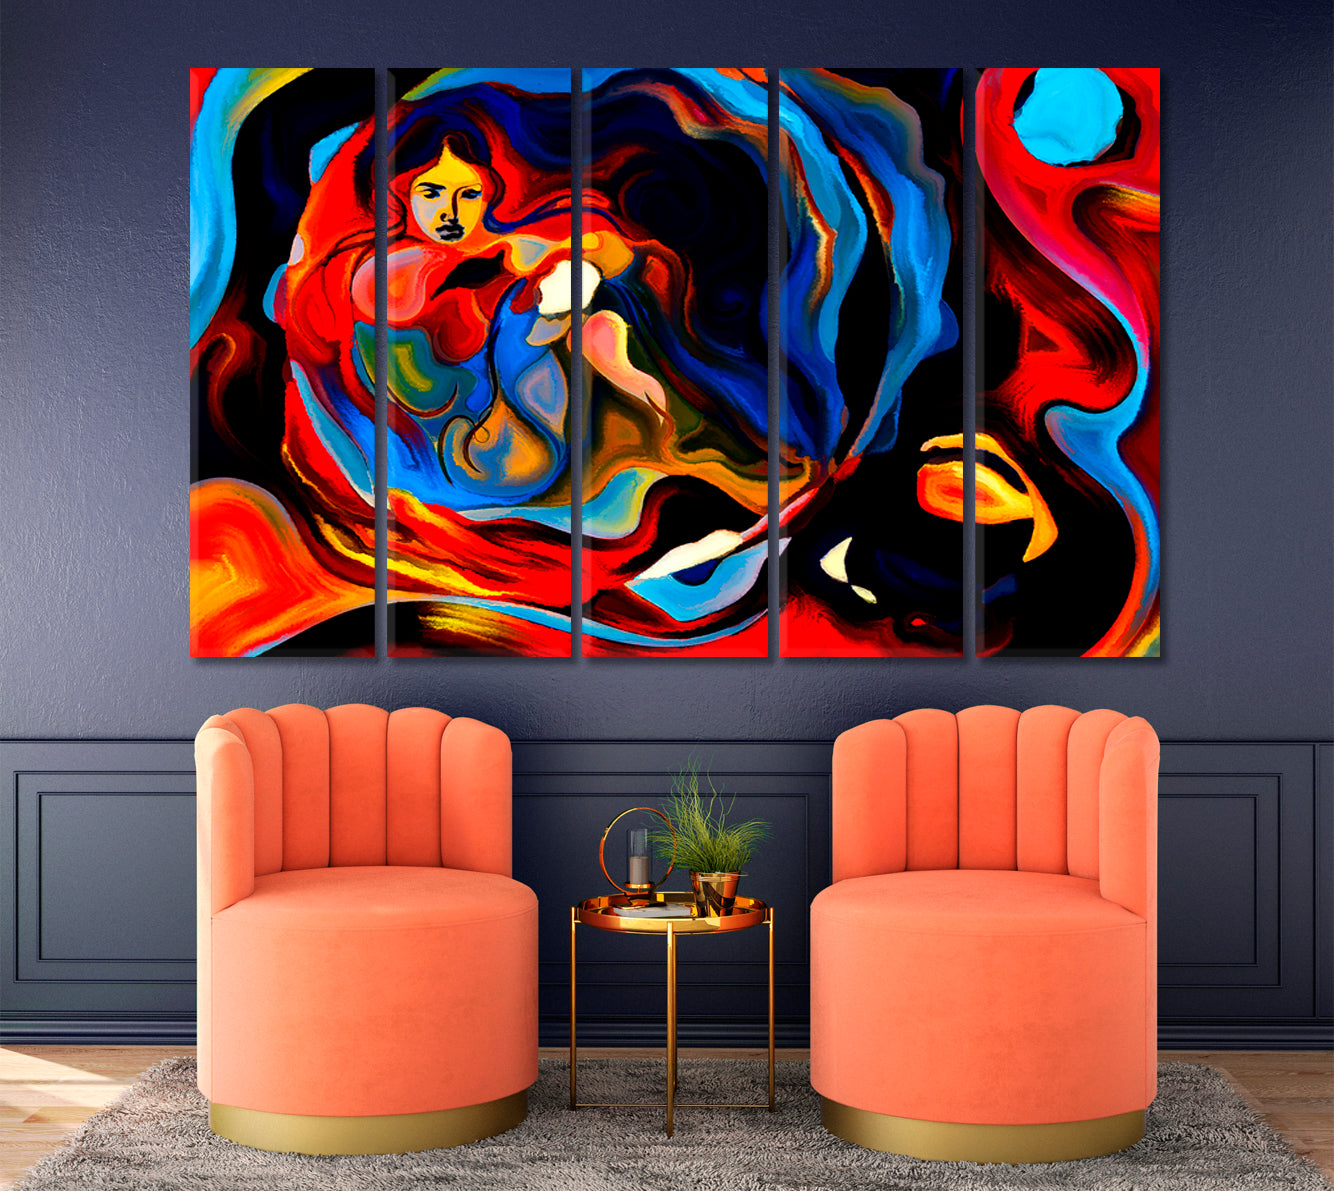 Colorful Human and Geometric Forms Collection Contemporary Art Artesty 5 panels 36" x 24" 